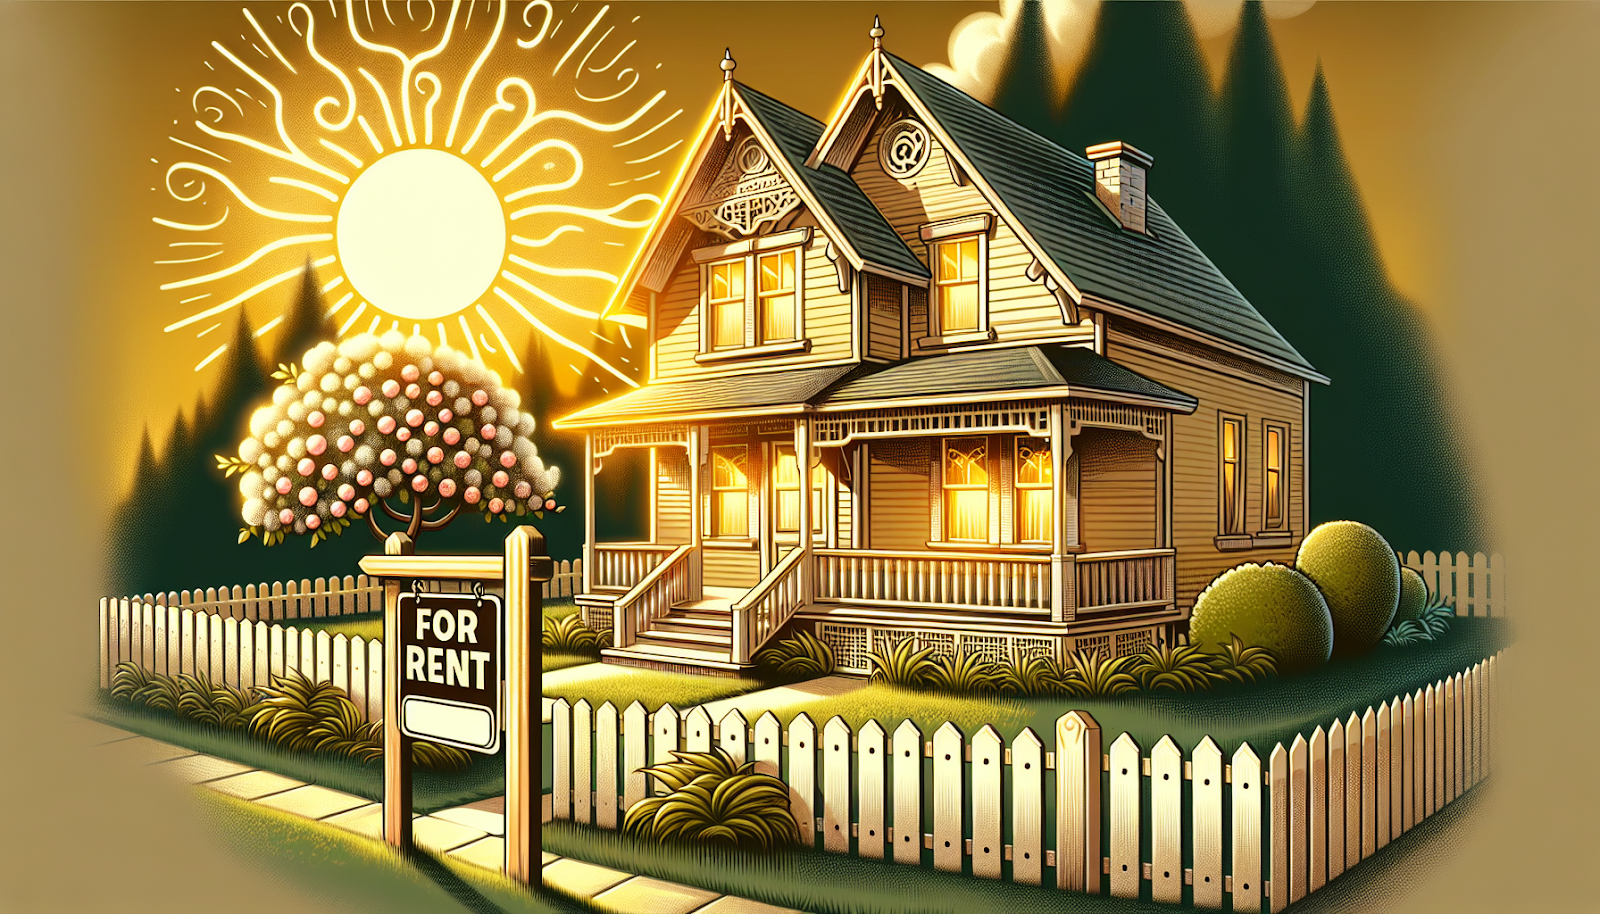 Illustration of a real estate investment property